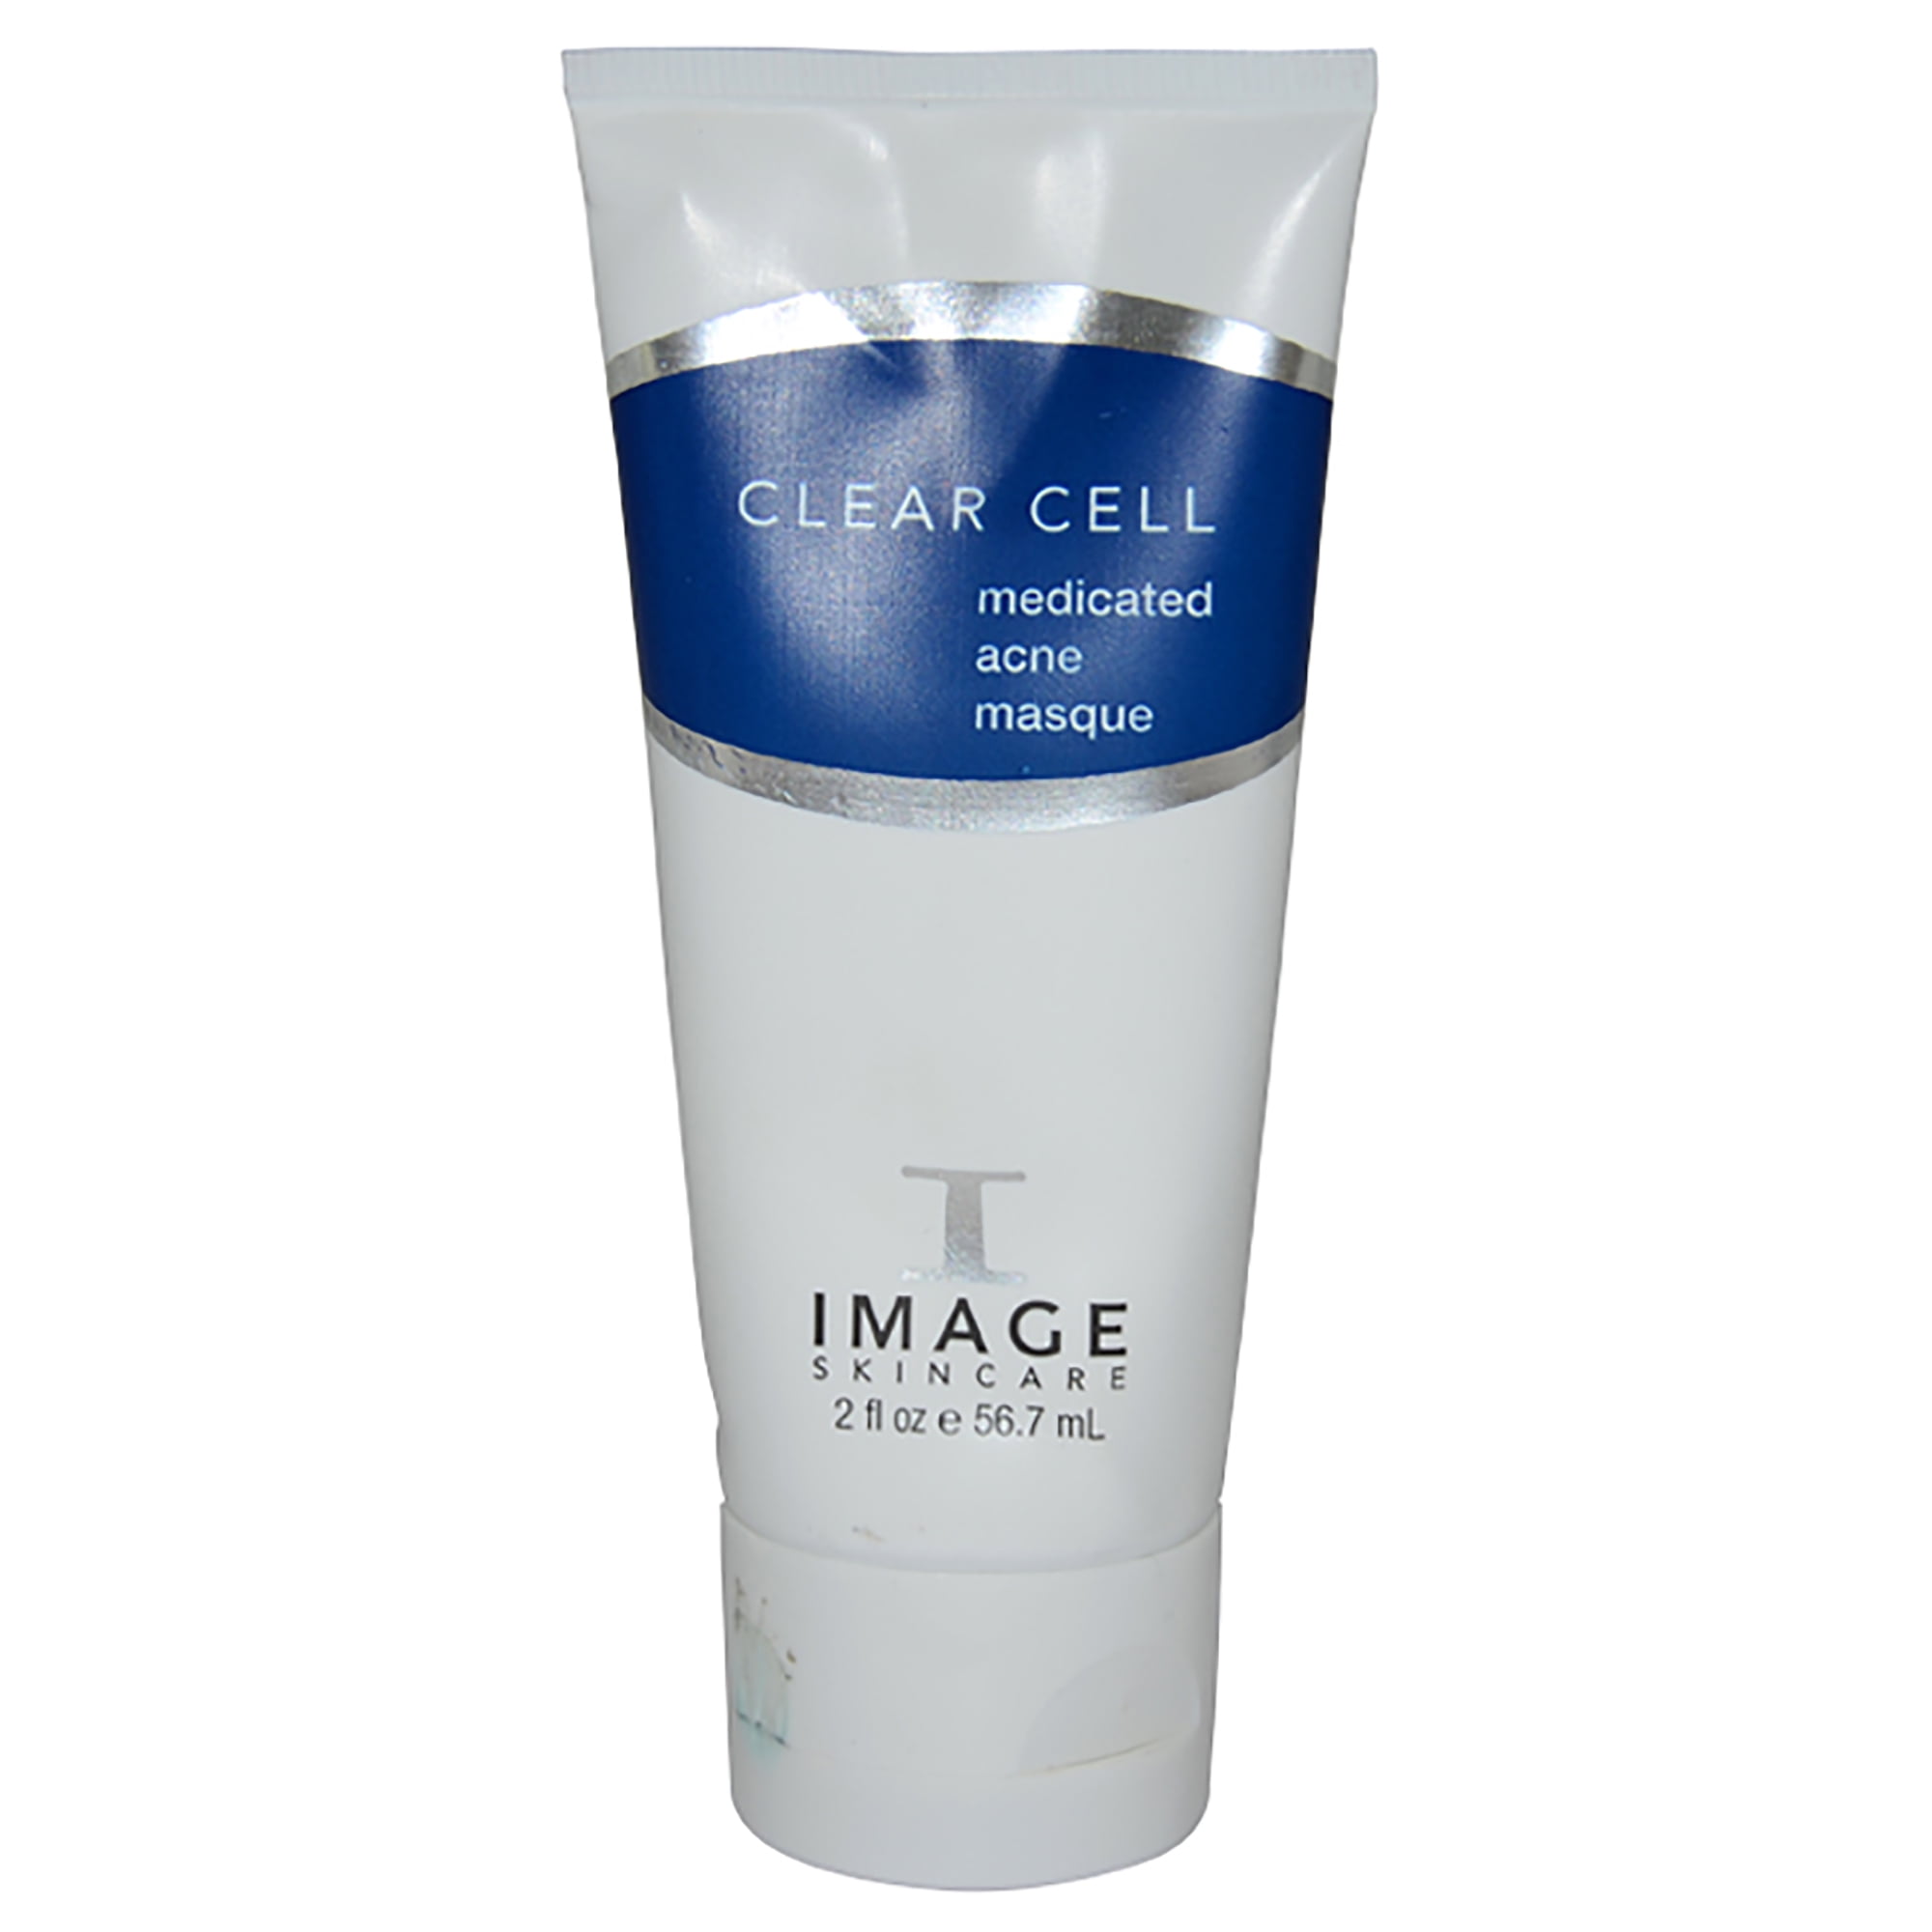 Clear cell. Clear Cell Medicated acne Masque. Image r Clear Cell Medicated acne Masque маска анти-акне с ана/вна и серой 56,7 мл. Маска Cell image. Clear Cell image Skincare.